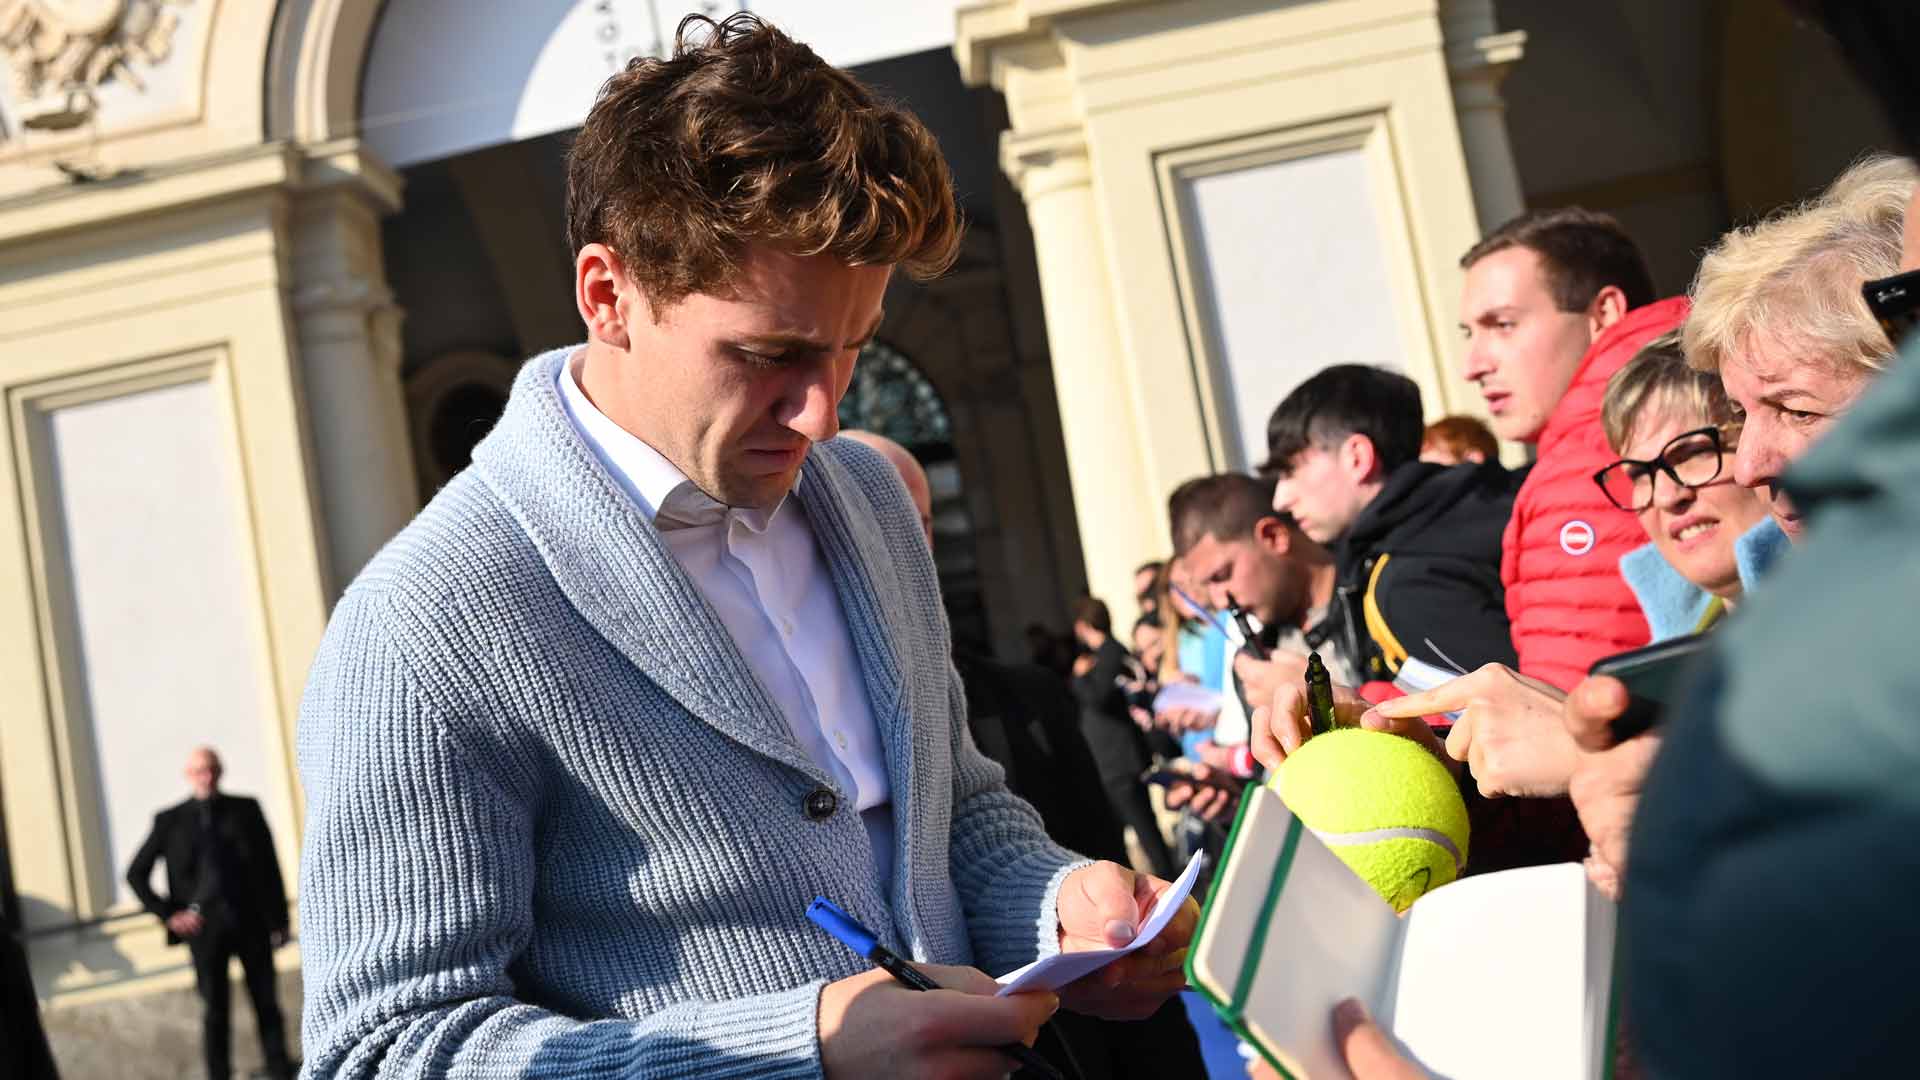 Casper Ruud greets fans at the 2022 Nitto ATP Finals media day.